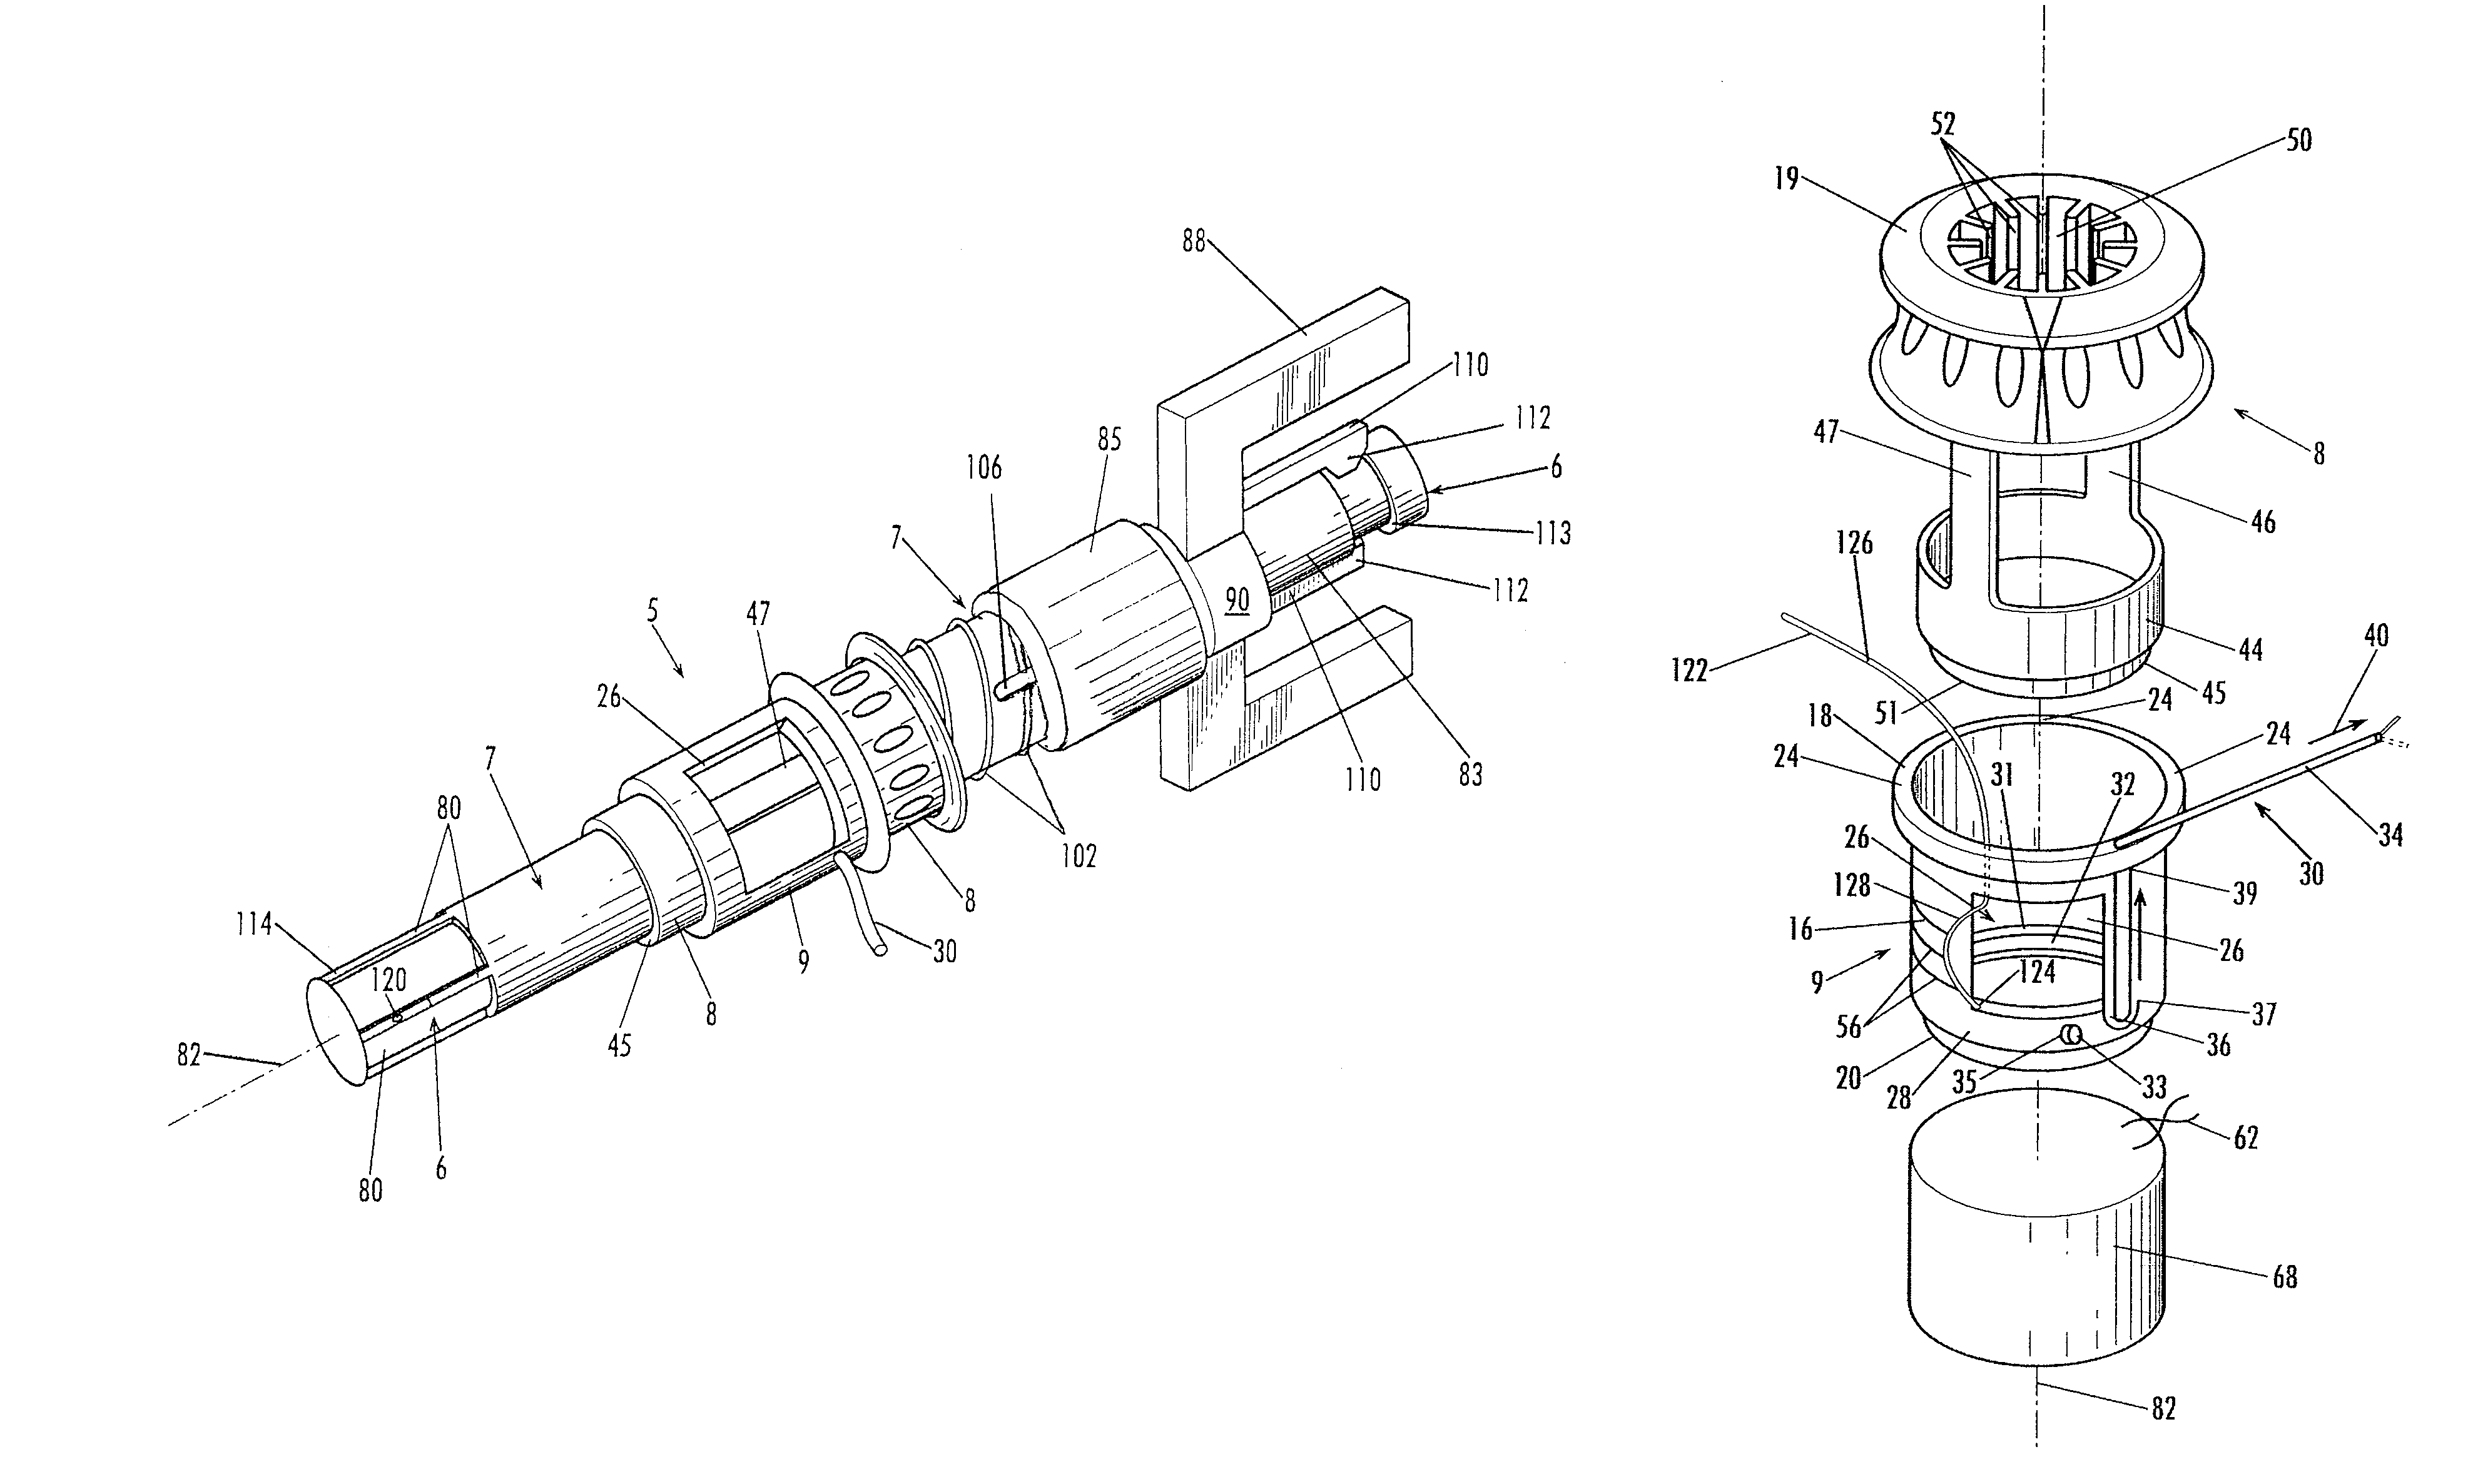 Surgical instrument for detecting, isolating and excising tumors